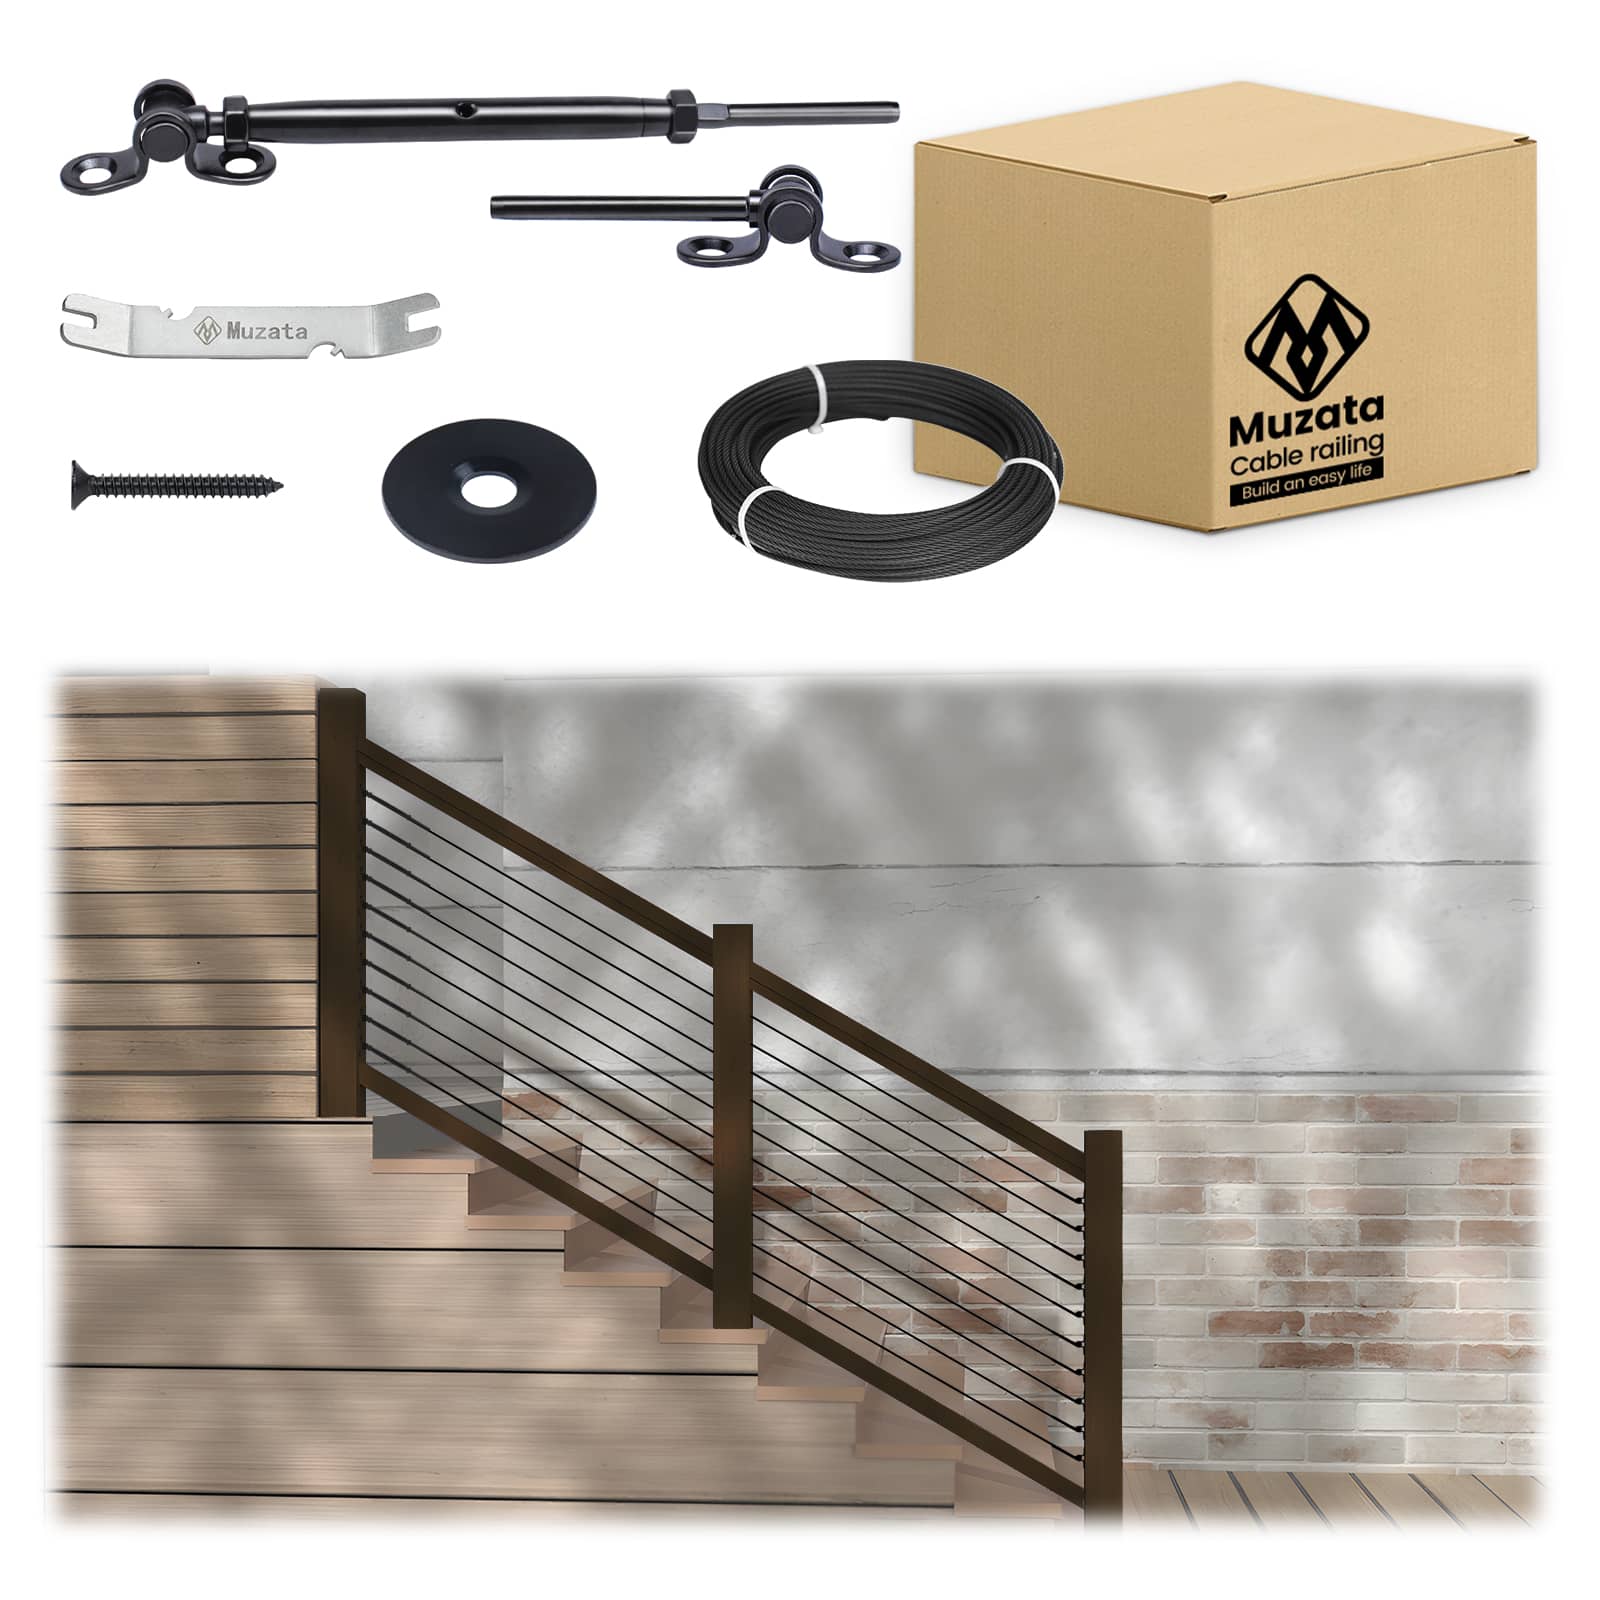 Muzata Wood Cable Railing System, All-in-One DIY Stair Section